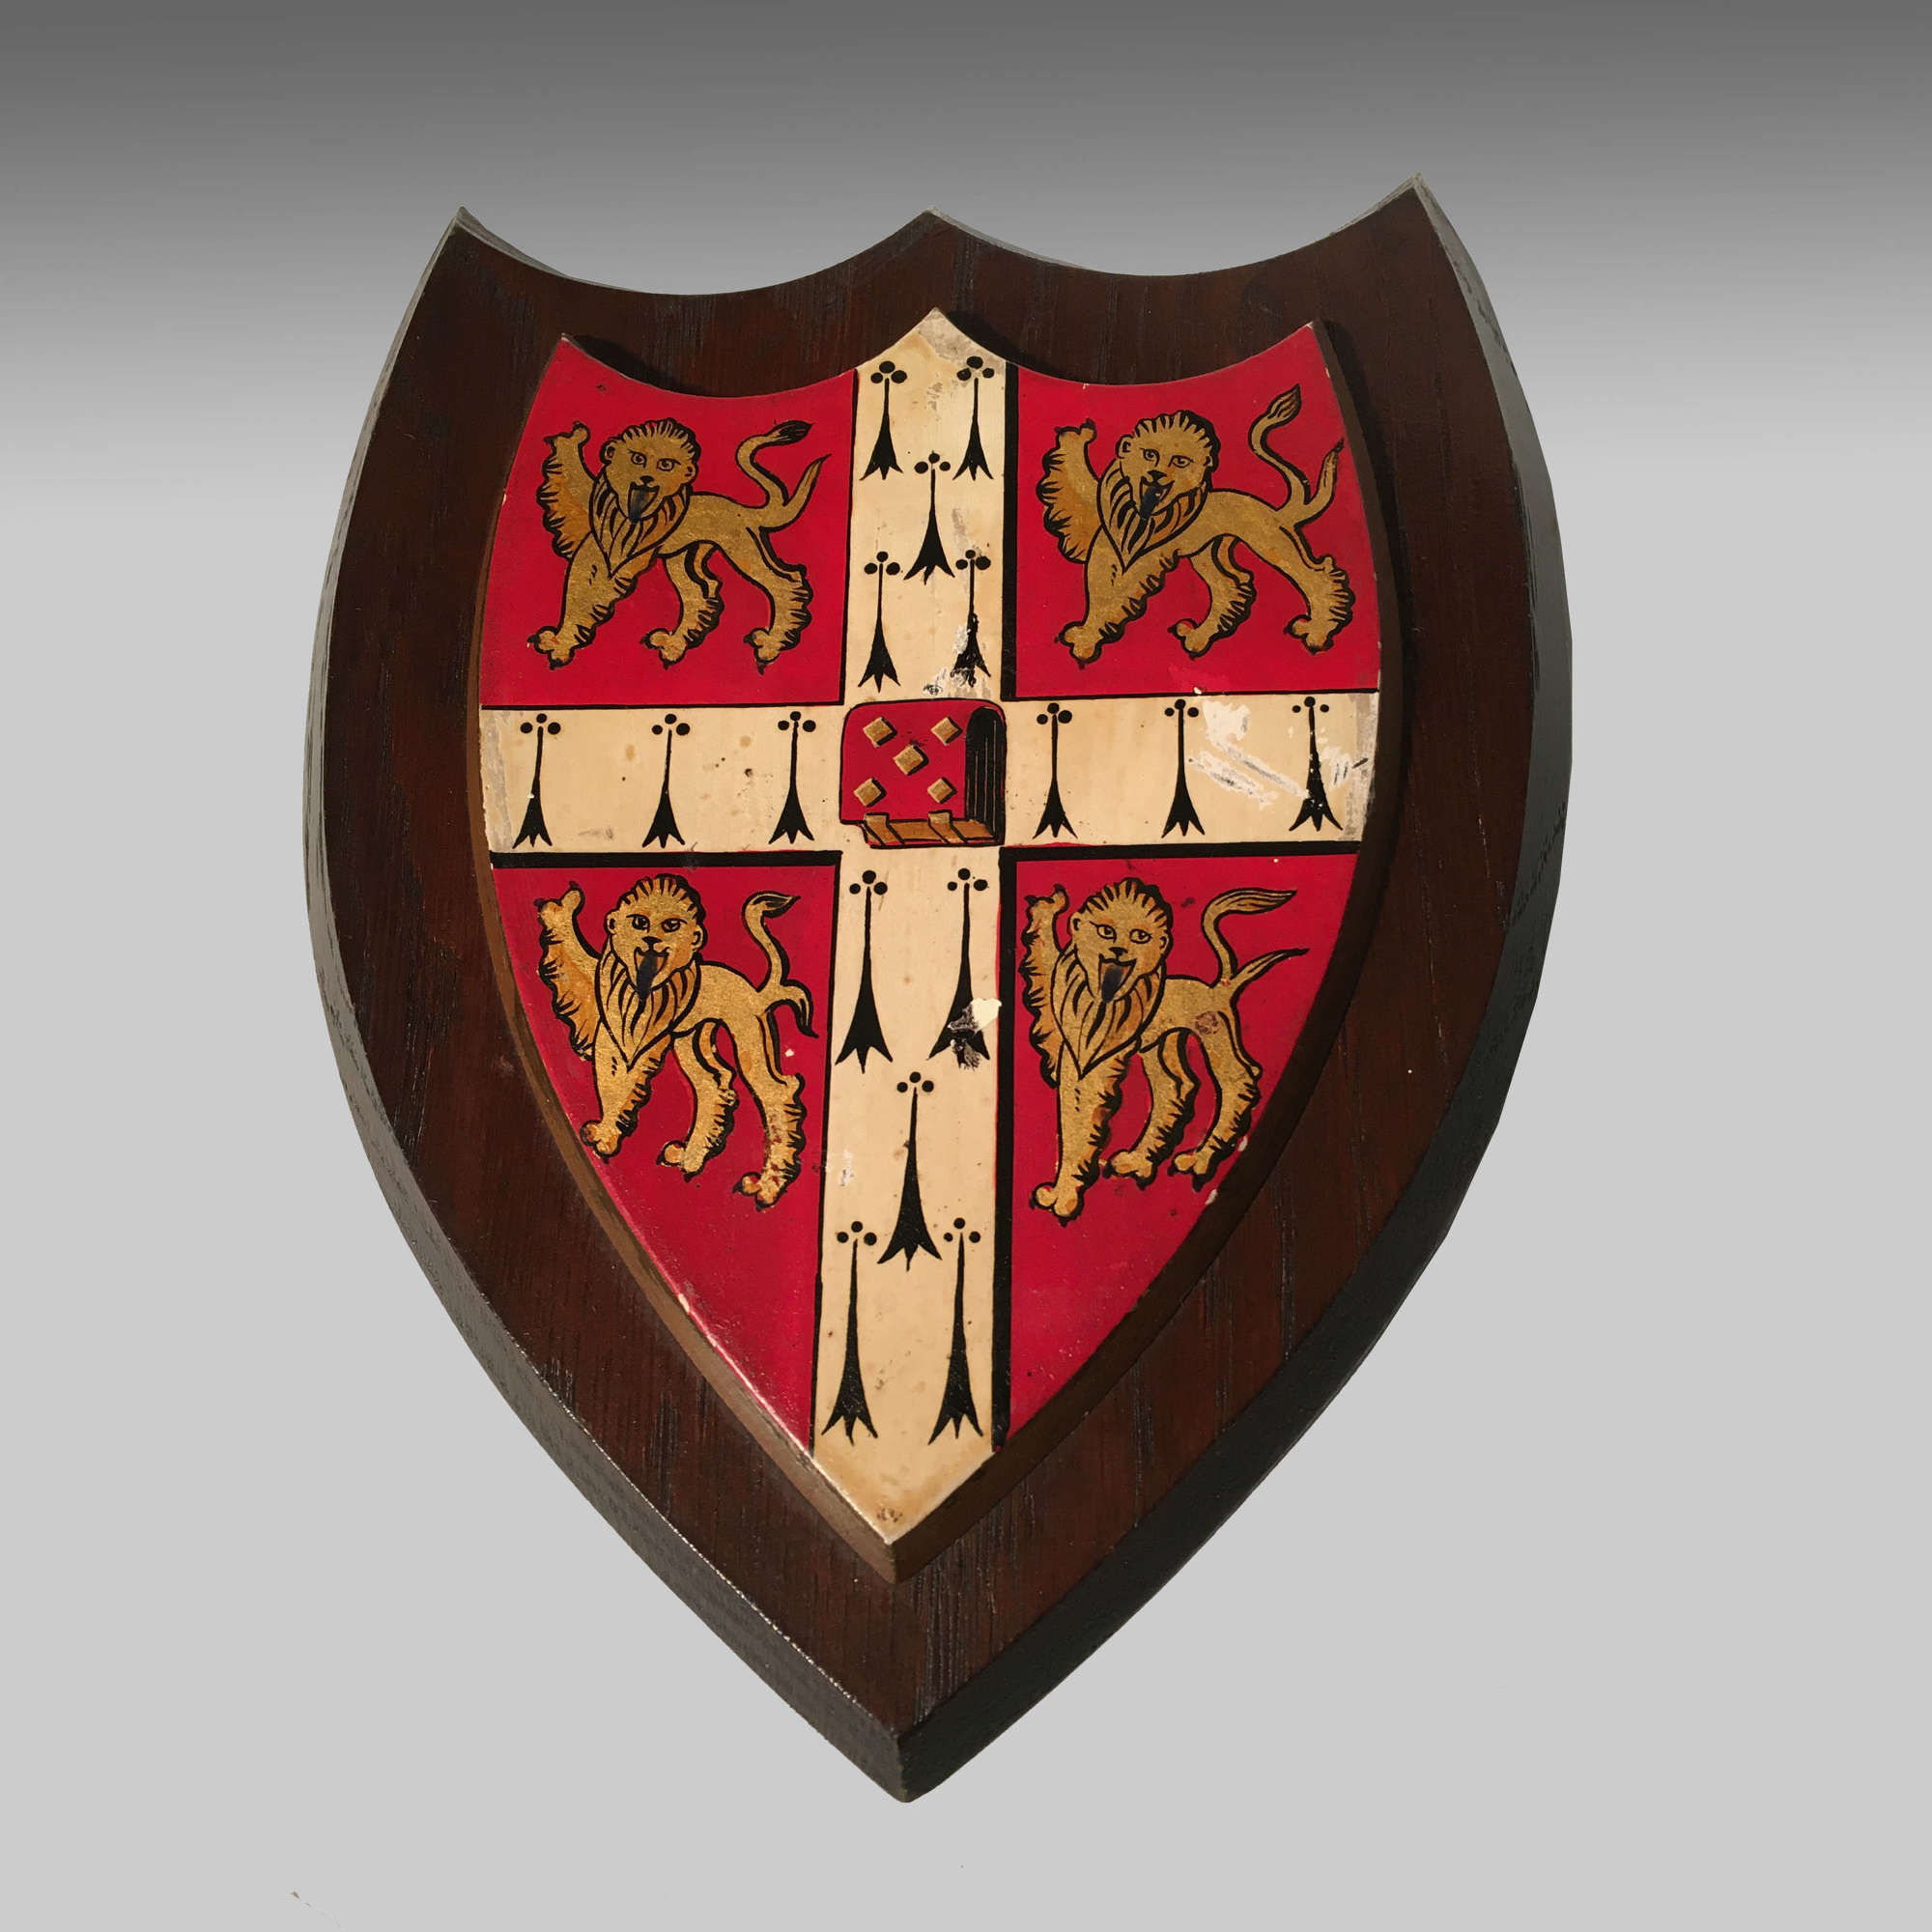 Armorial oak shield-the coat of arms of the University of Cambridge